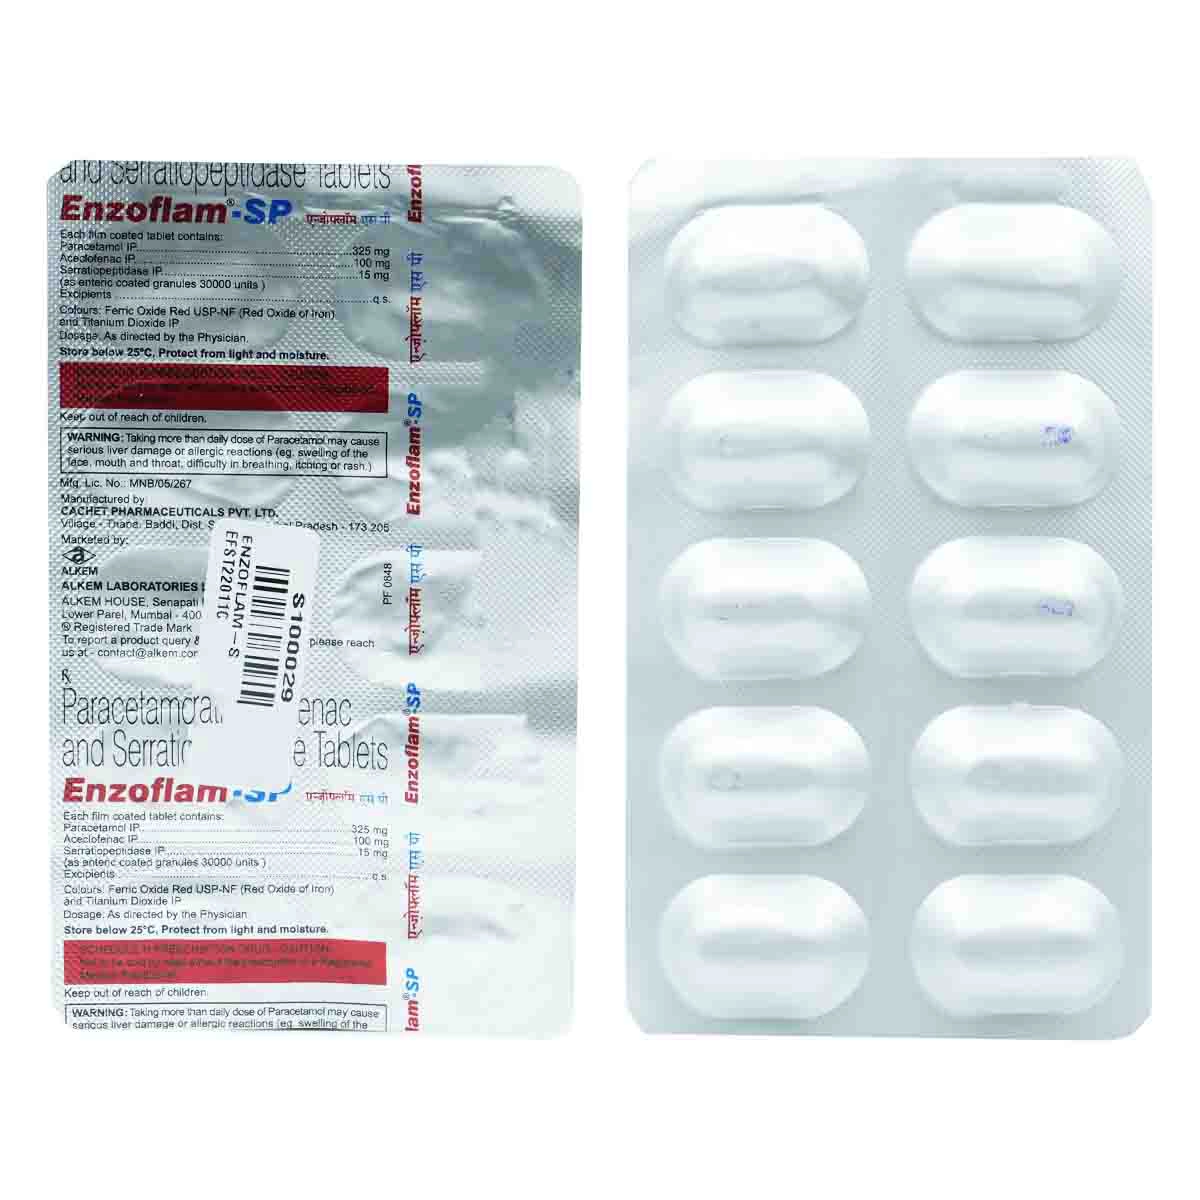 Riser SP Tablet: View Uses, Side Effects, Price and Substitutes